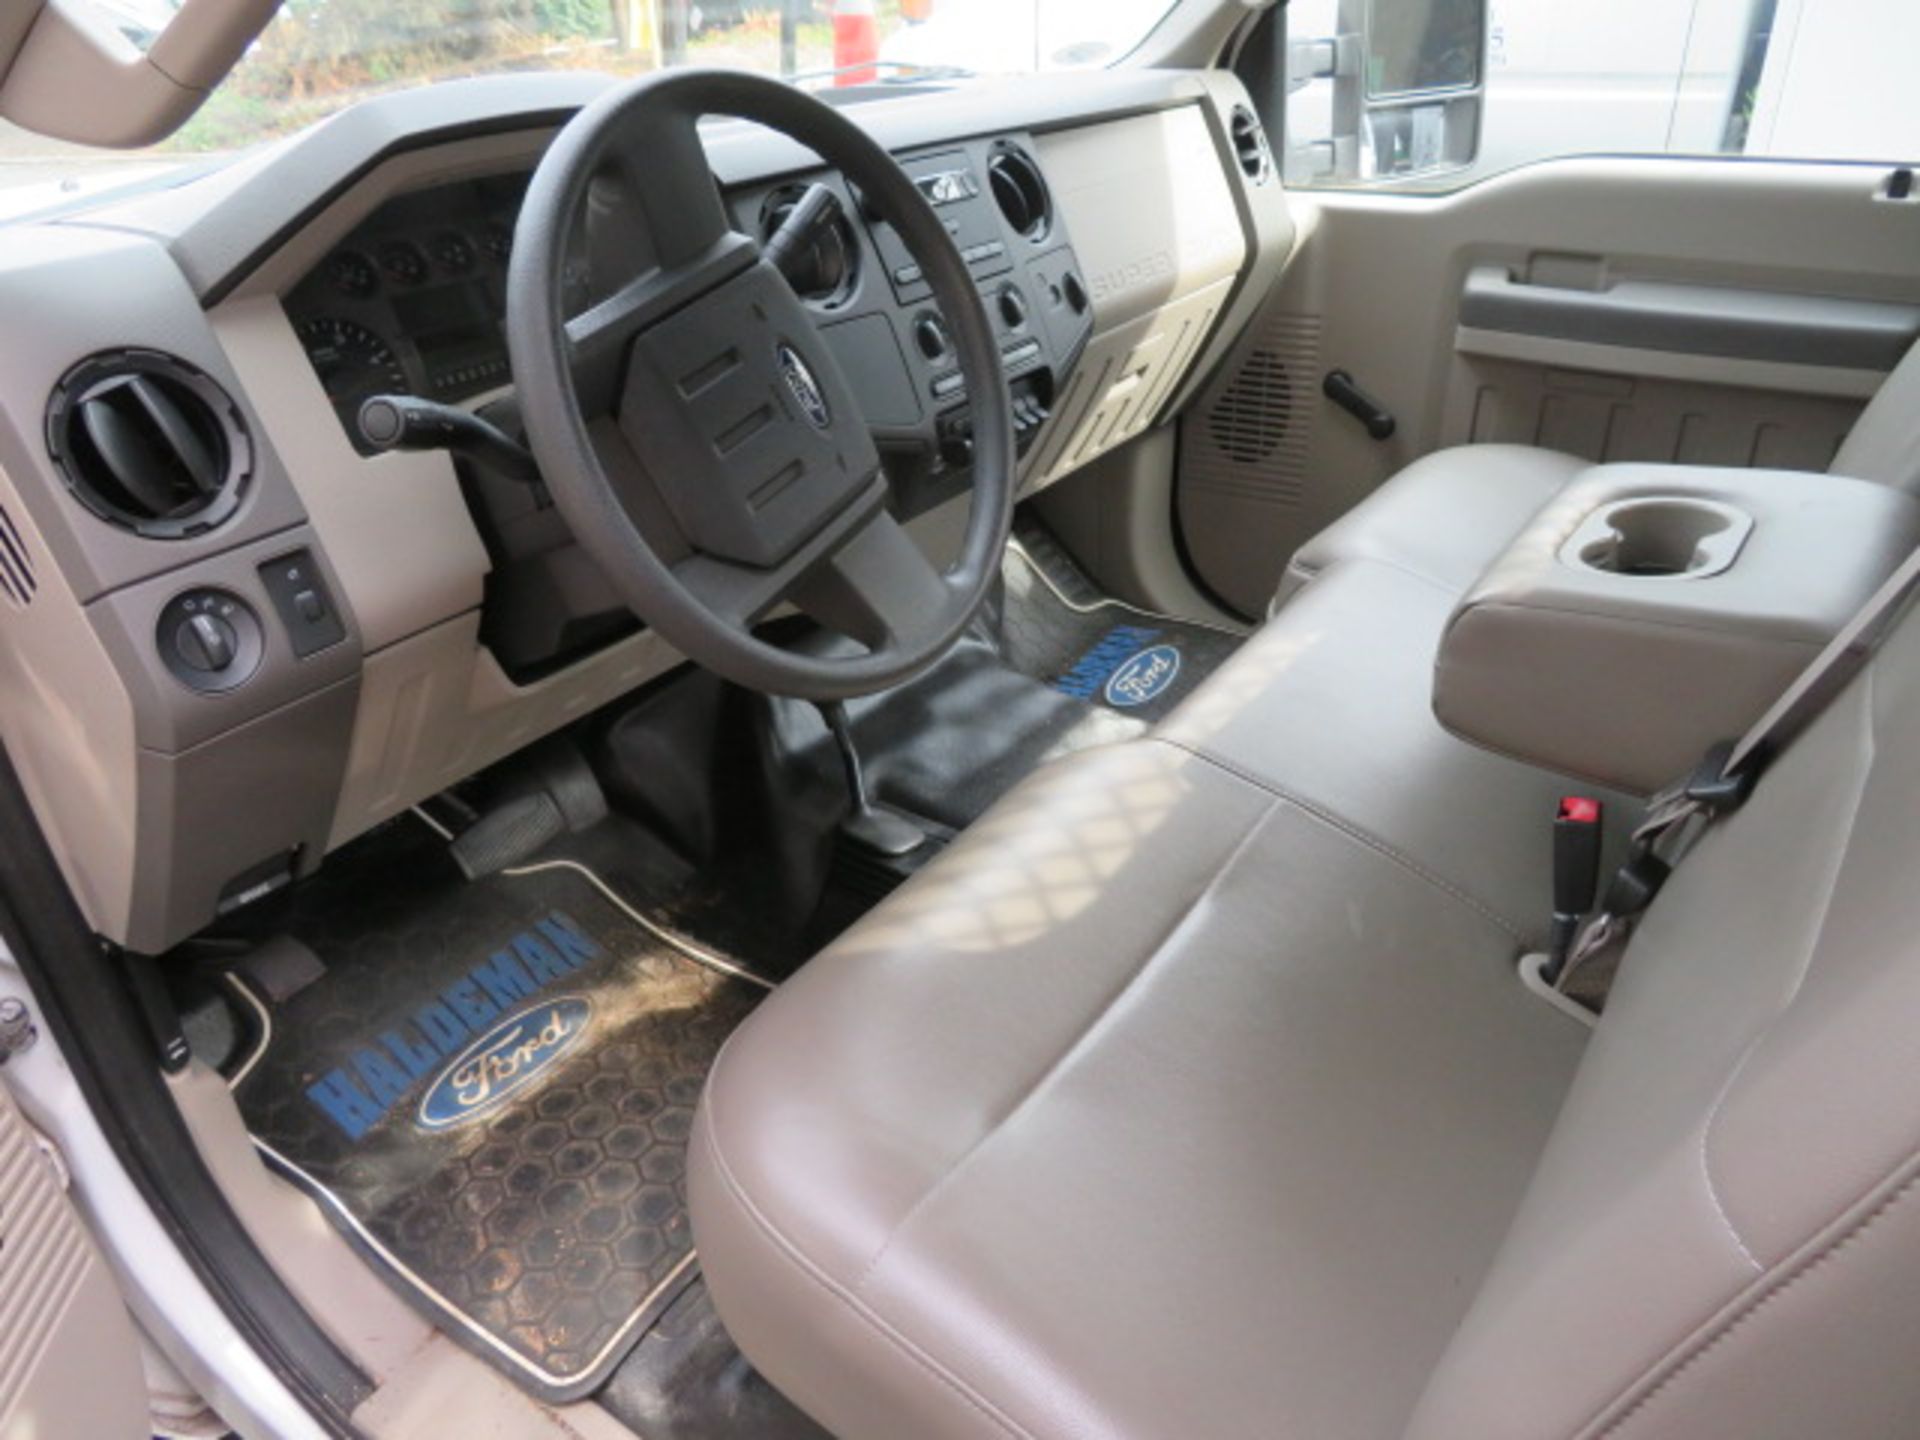 2008 FORD F350 4WD DUALLY STAKEBODY TRUCK, 4800 ORIGINAL MILES - Image 5 of 5